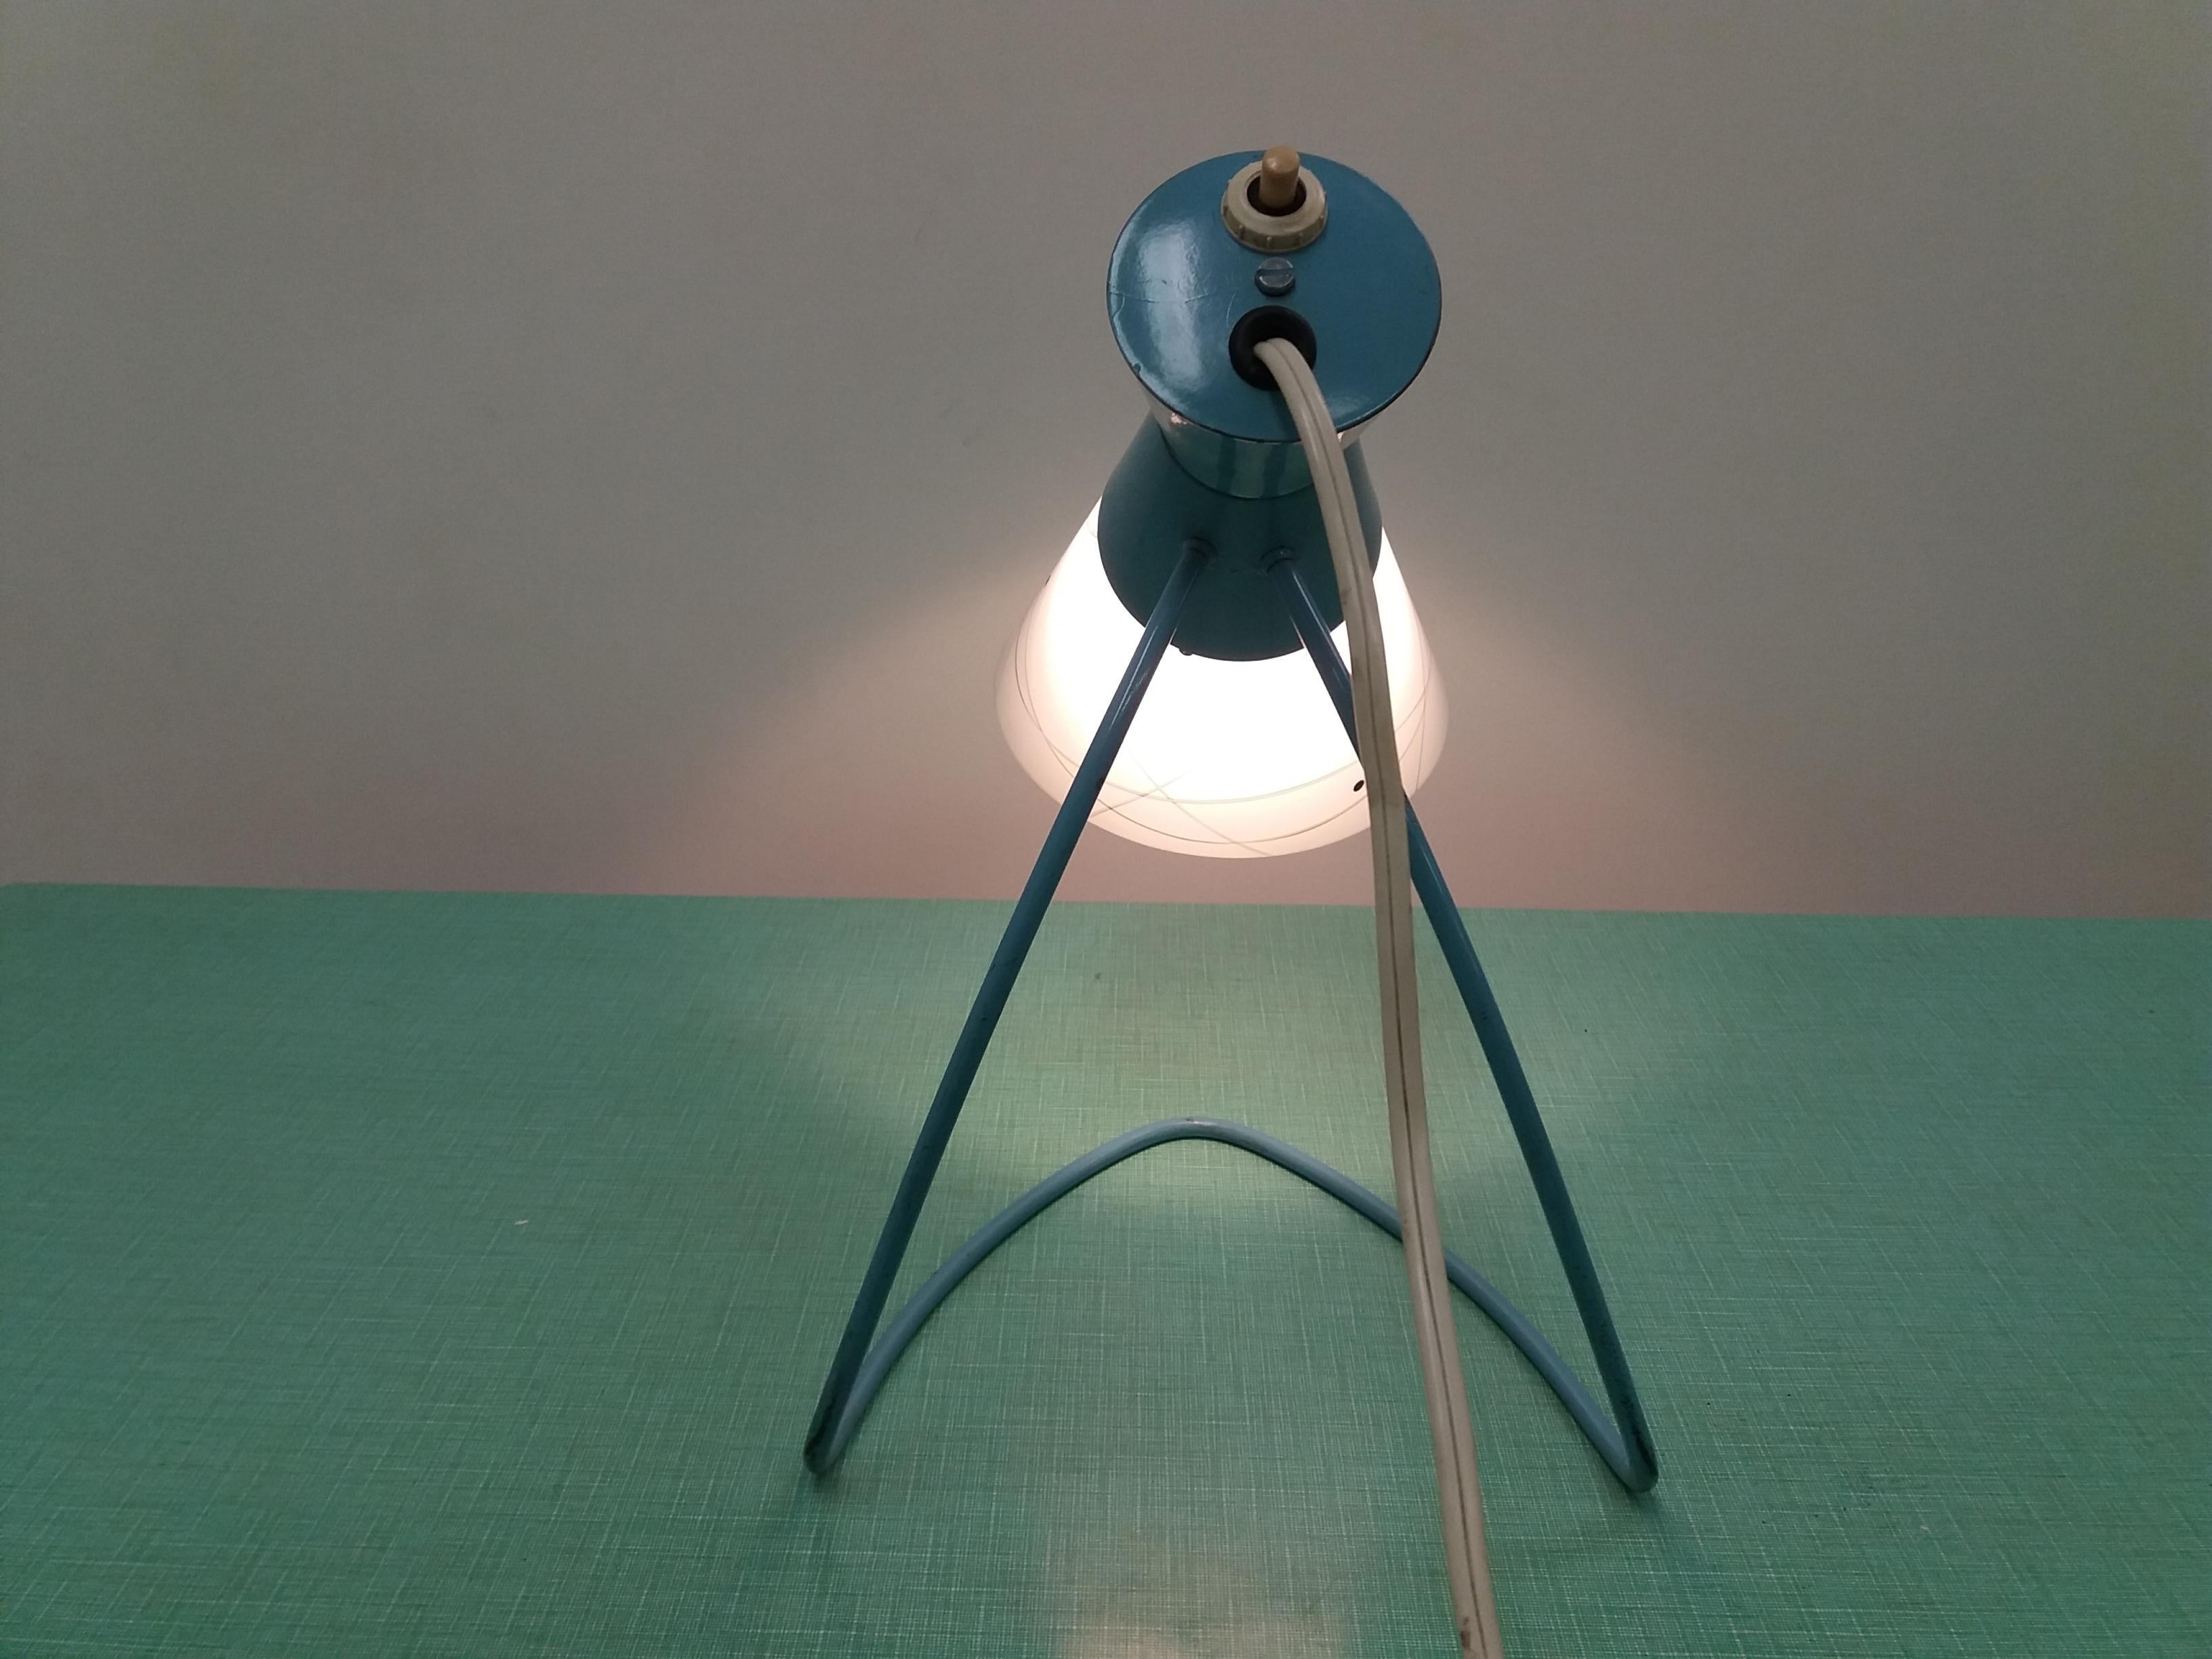 Czech Midcentury Table Lamp Designed by Josef Hůrka for Napako, 1958 For Sale